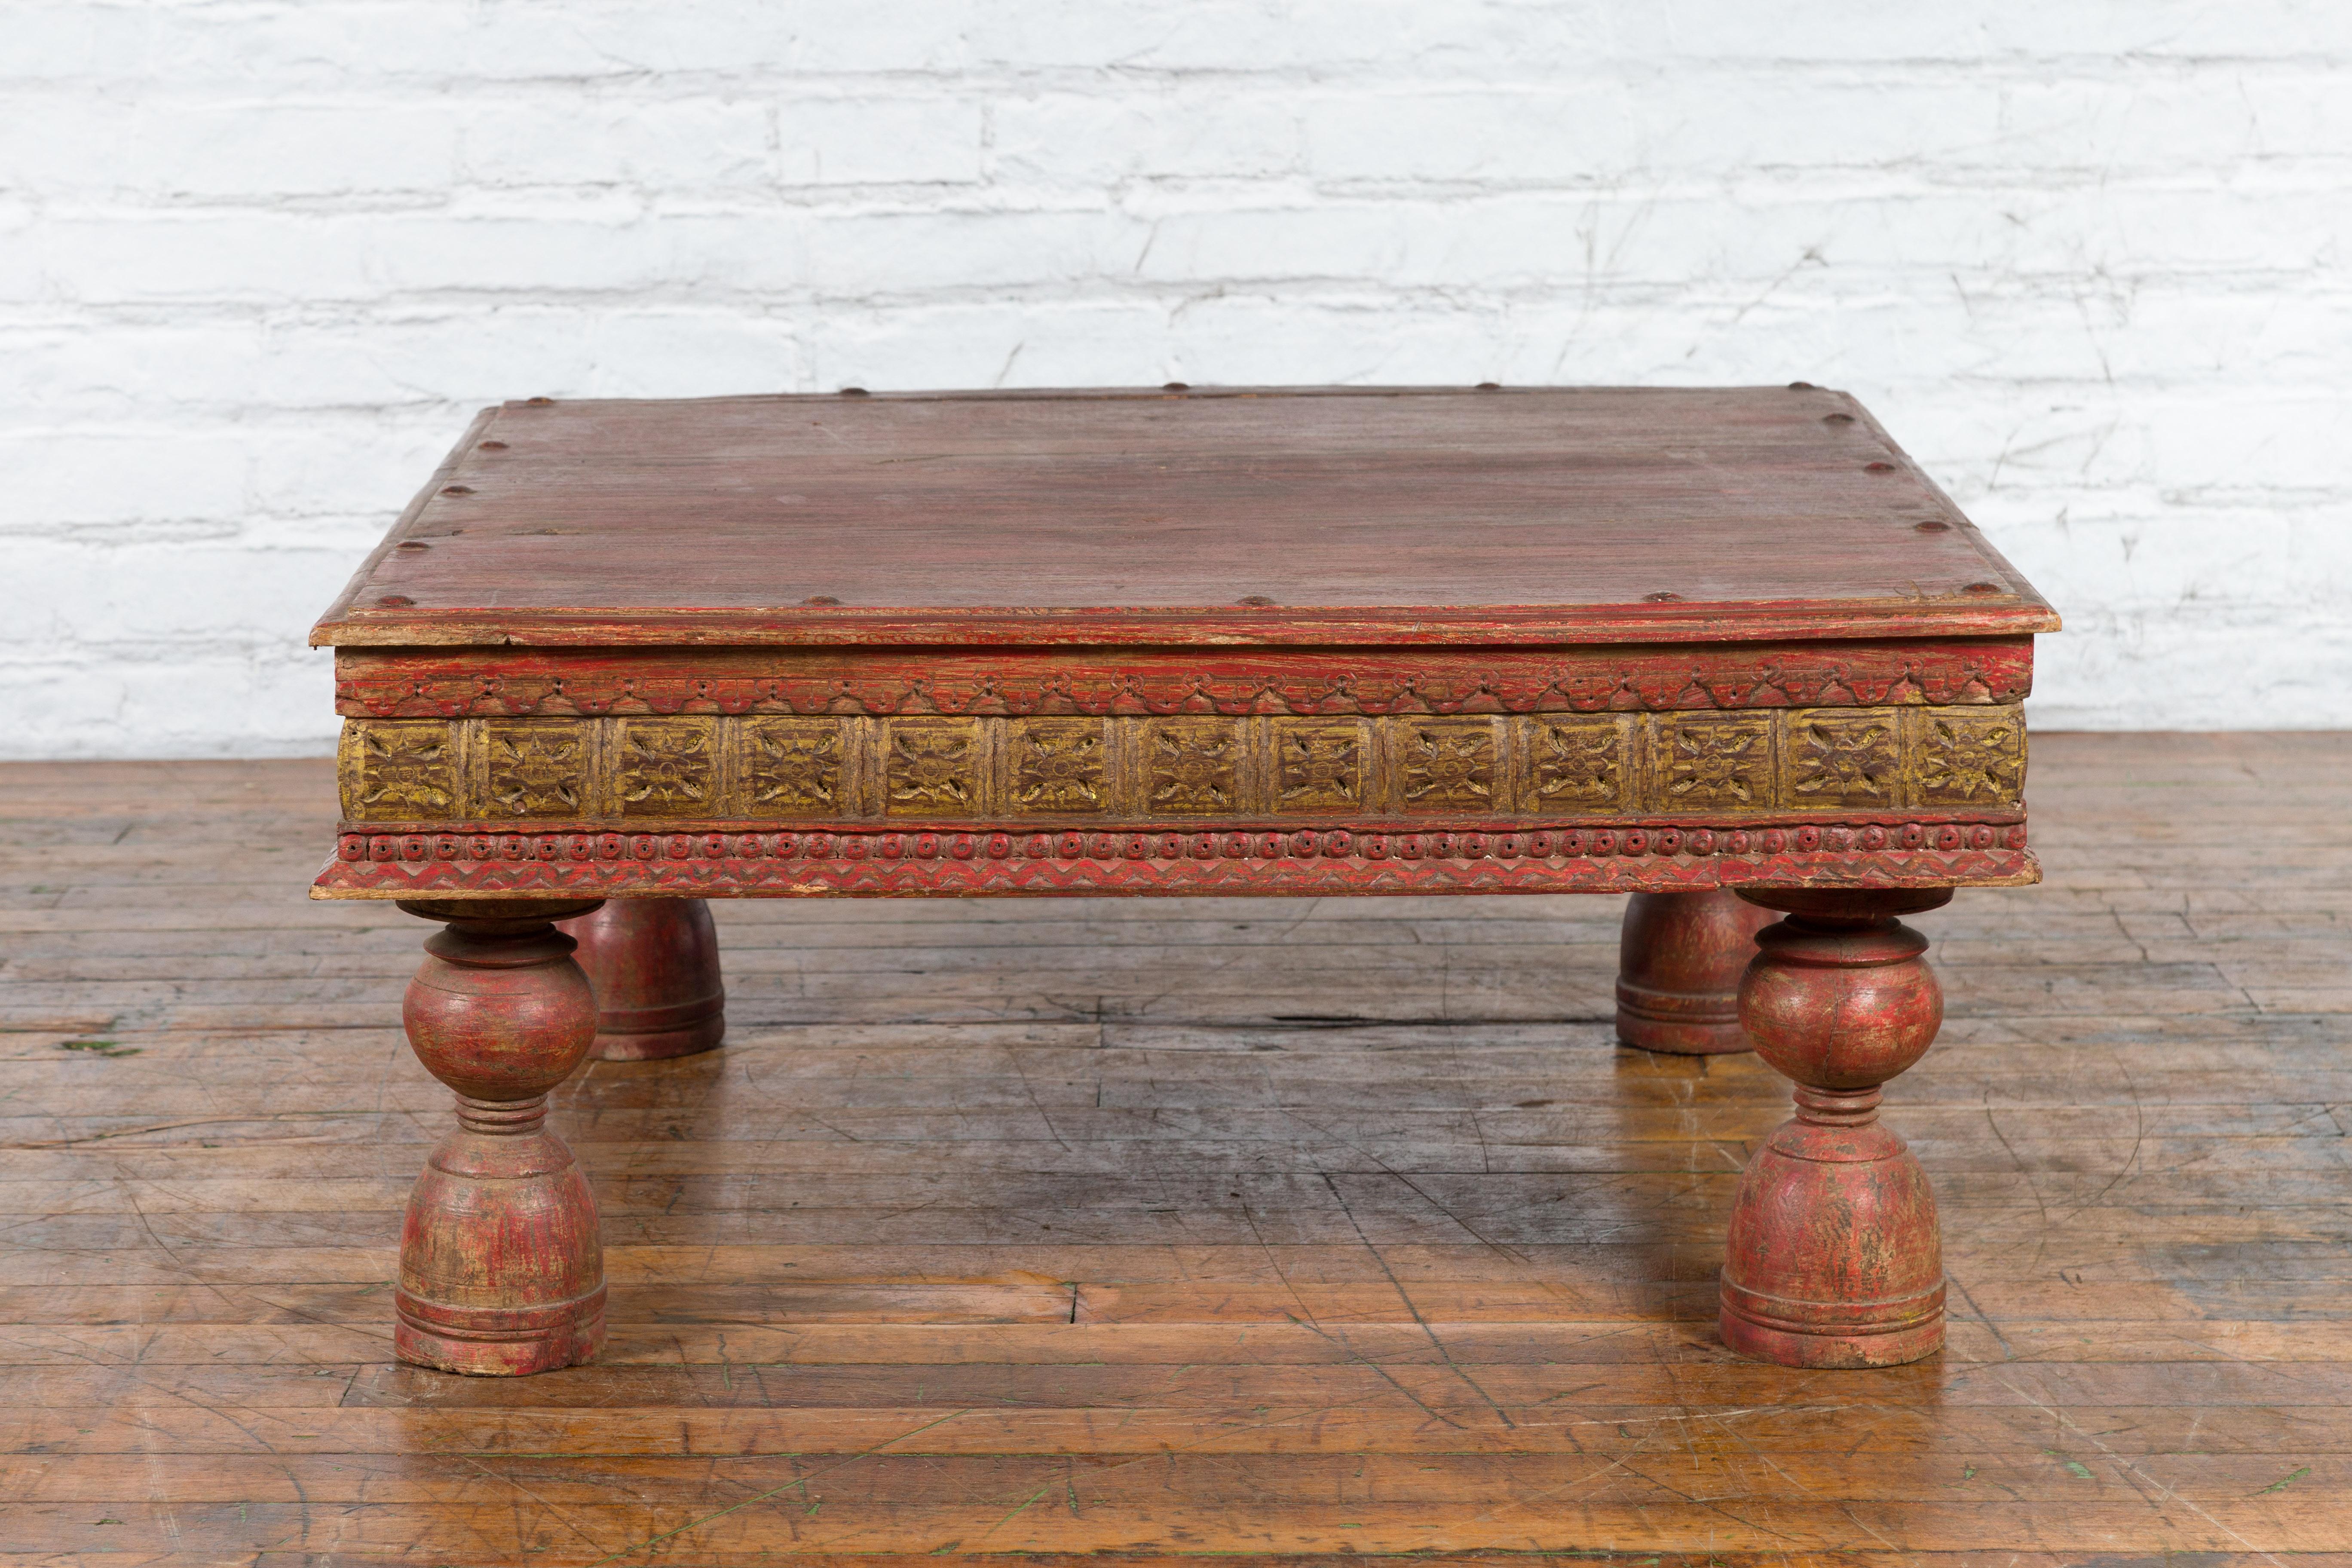 Indian Primitive Low Carved Wooden Coffee Table with Polychrome Accents For Sale 7